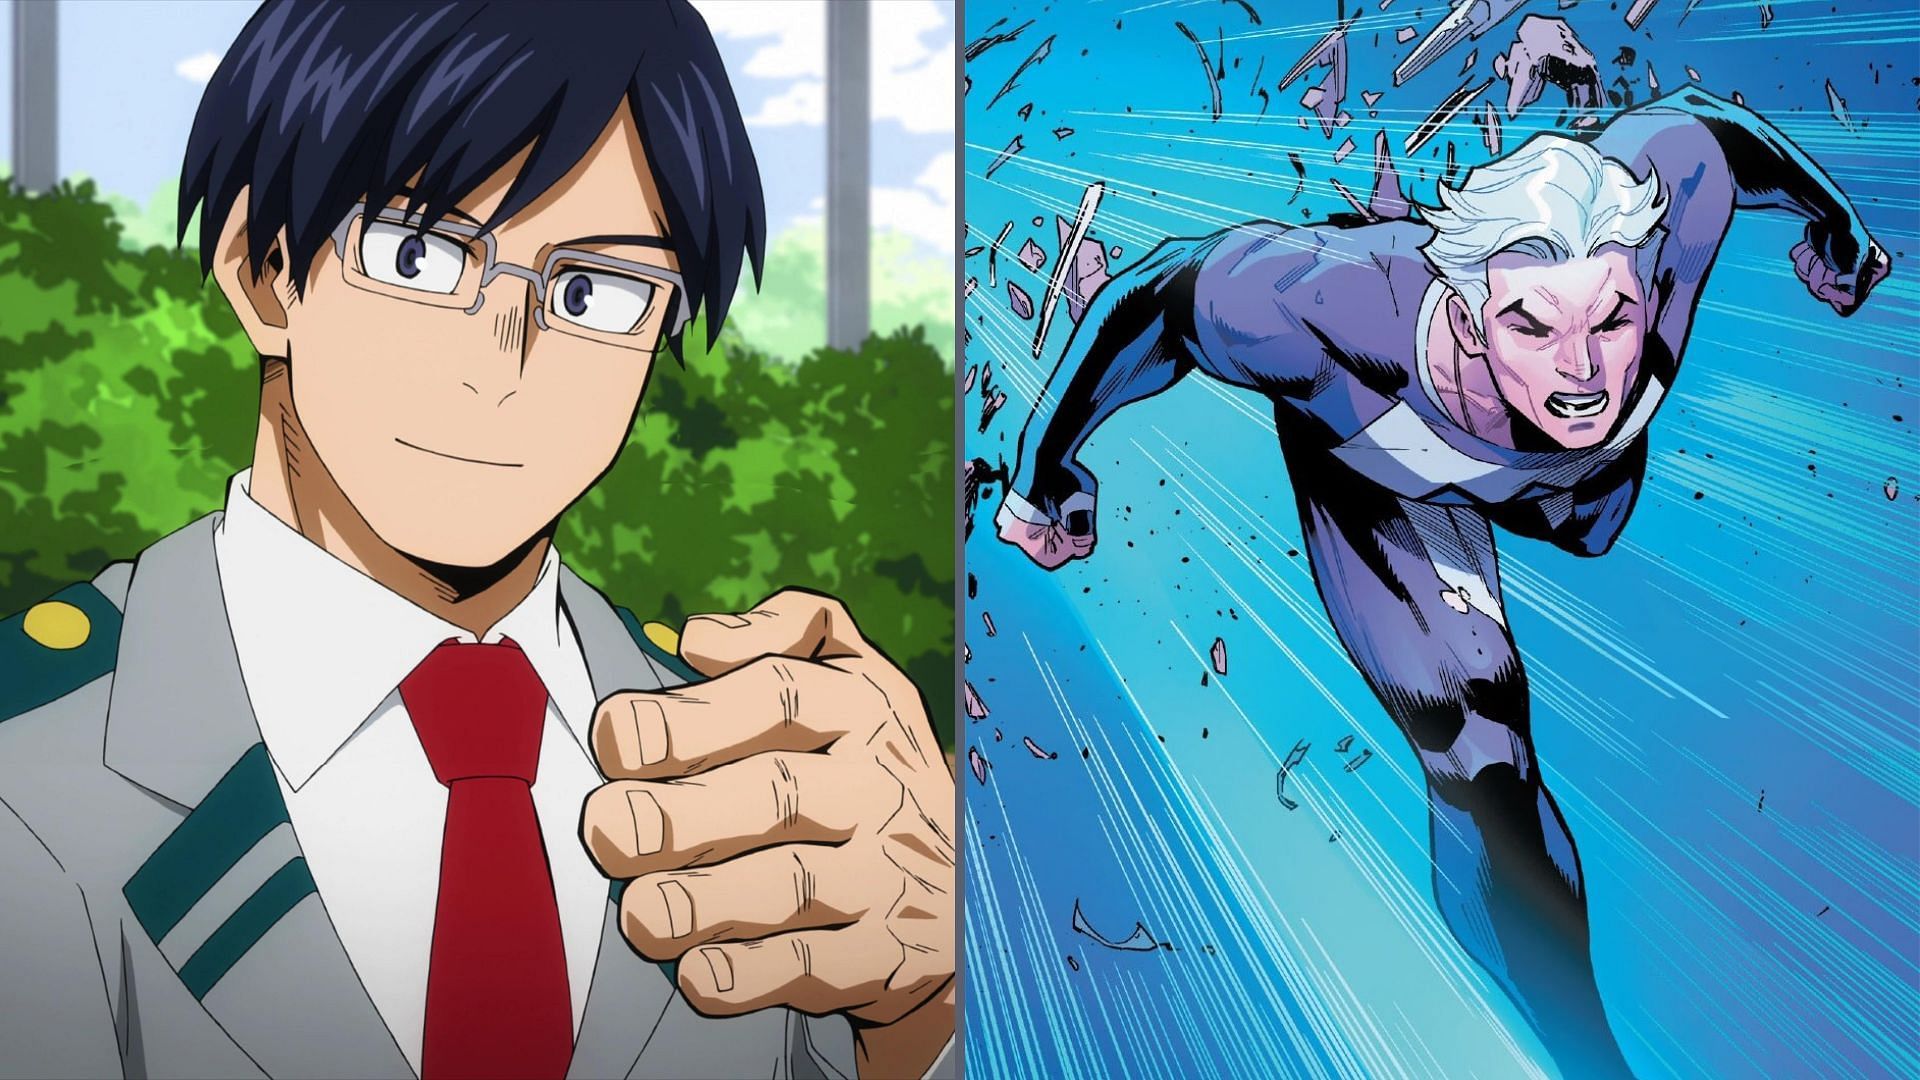 10 My Hero Academia characters who were inspired by Marvel